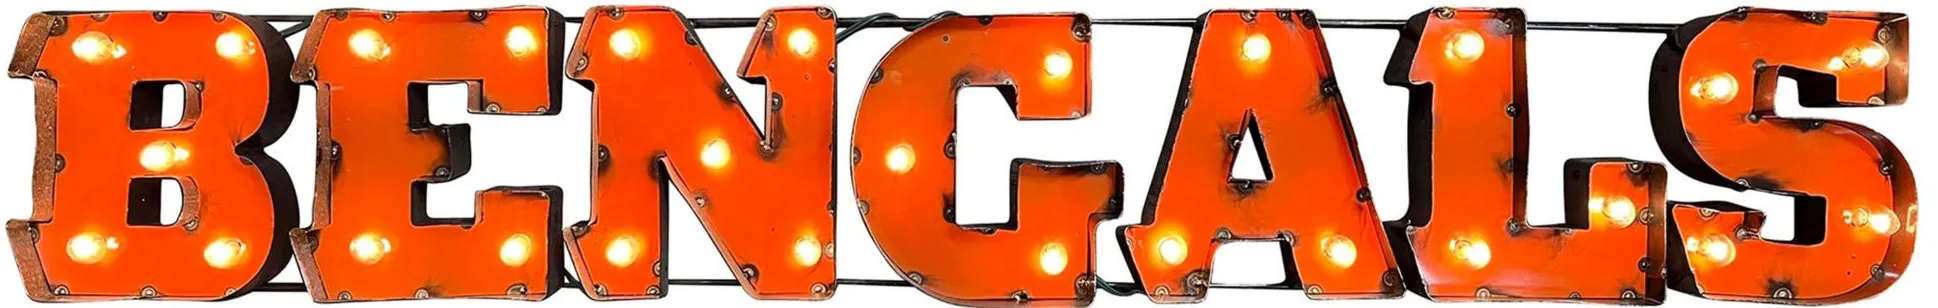 NFL Lighted Recycled Metal Sign in Cincinnati Bengals by Imperial International